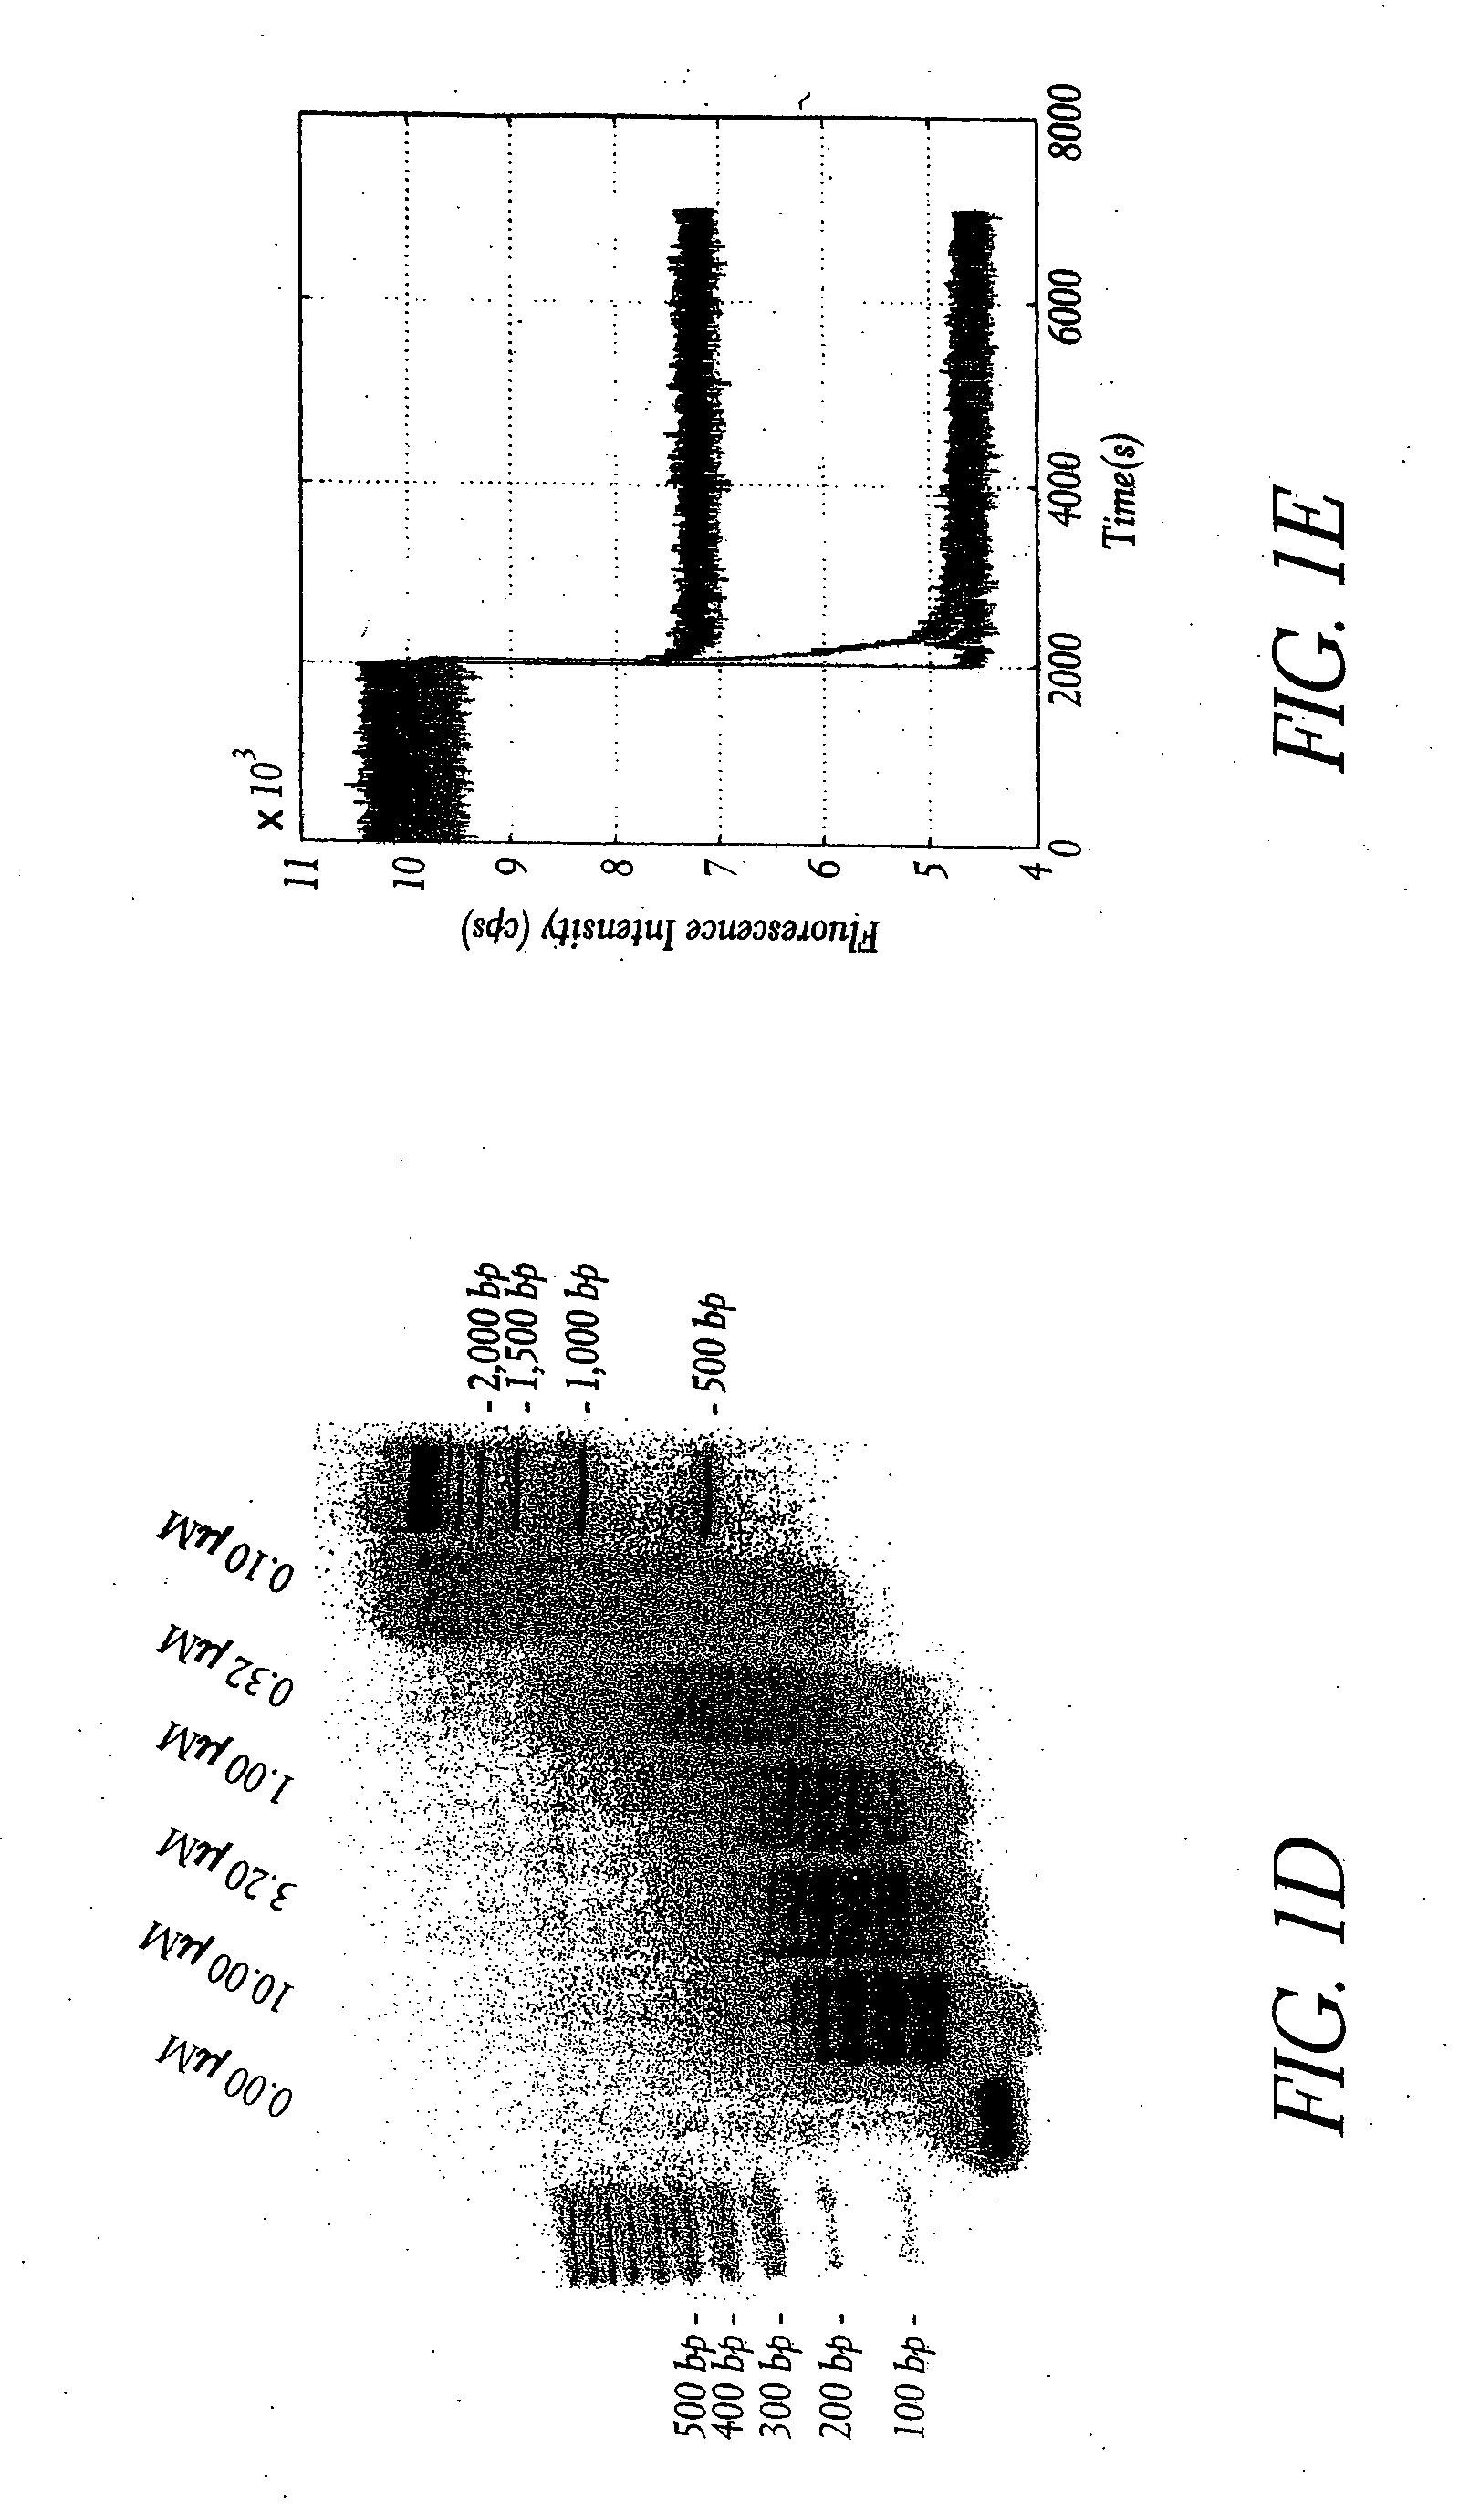 Hybridization chain reaction amplification for in situ imaging